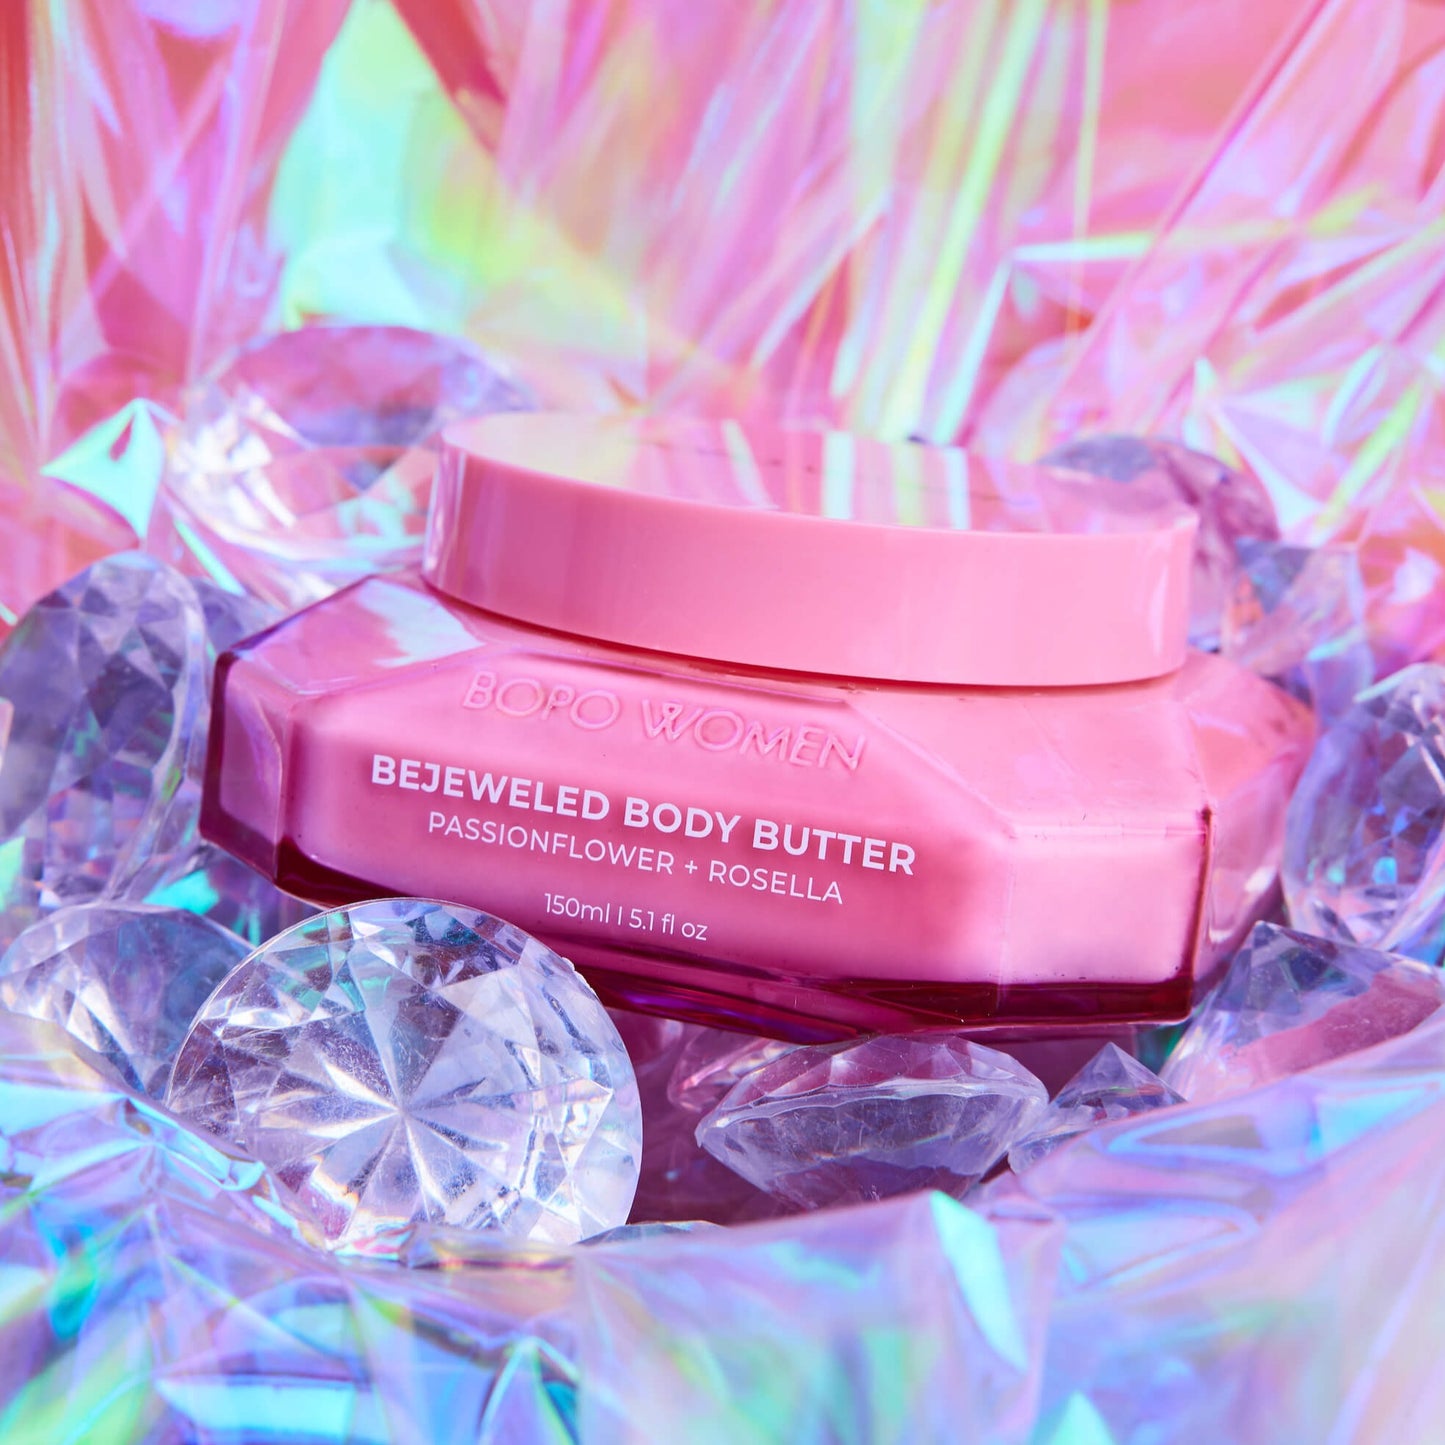 Bejeweled Body Butter